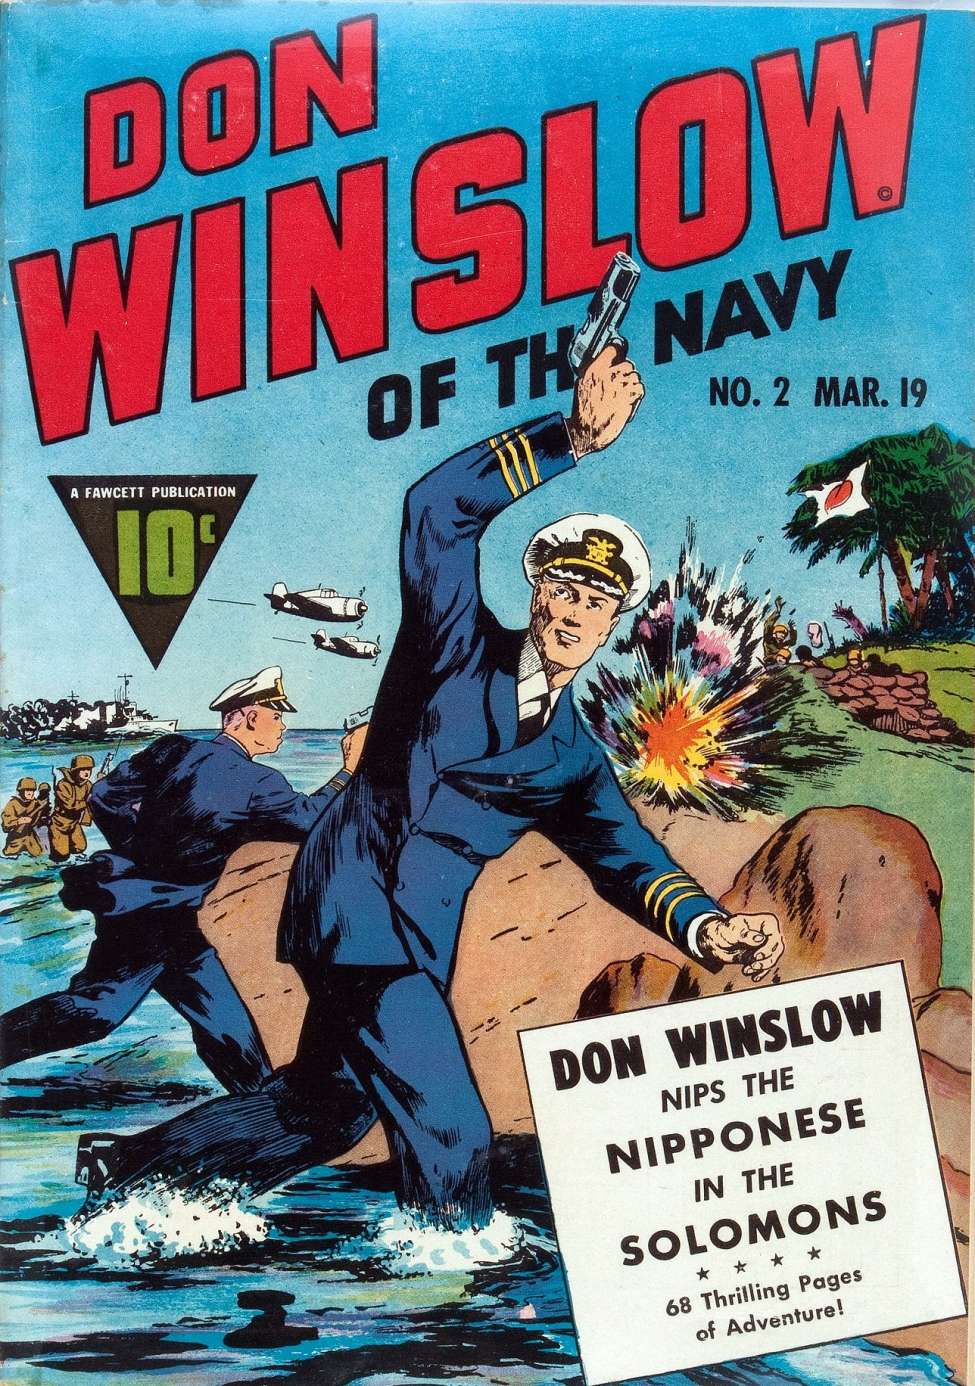 Book Cover For Don Winslow of the Navy 2